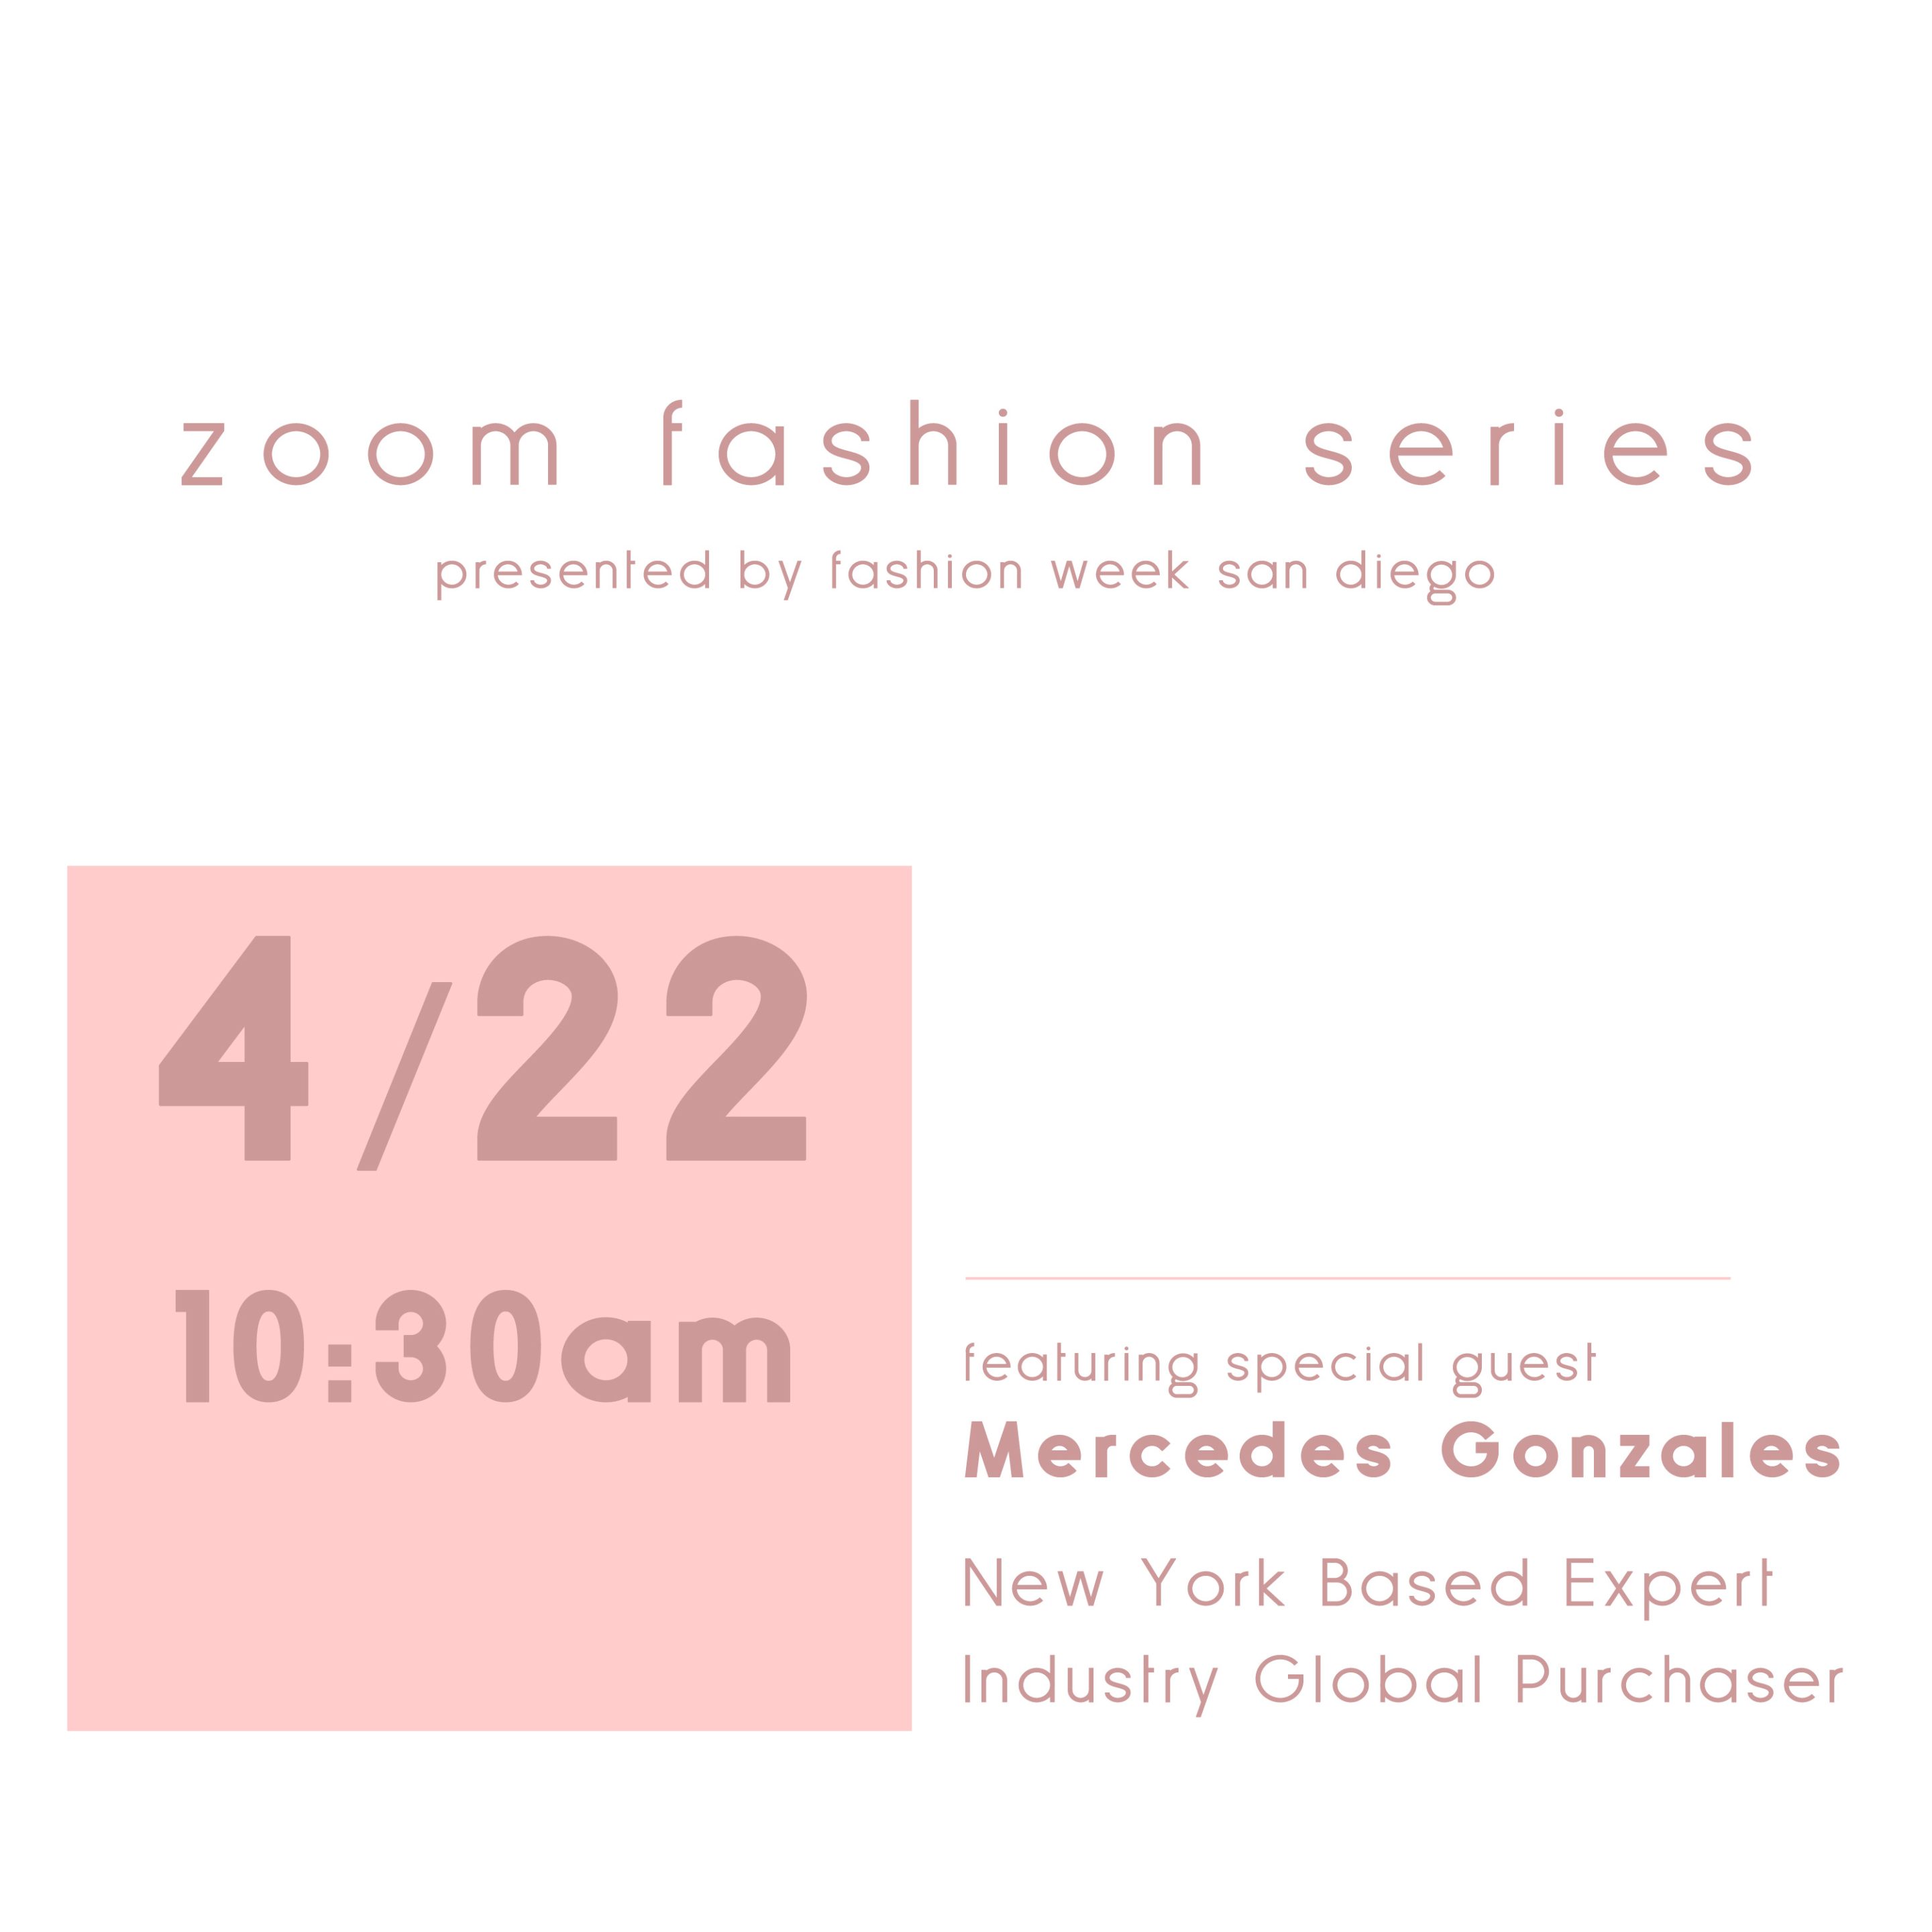 Zoom Fashion Series with Mercedes Gonzales